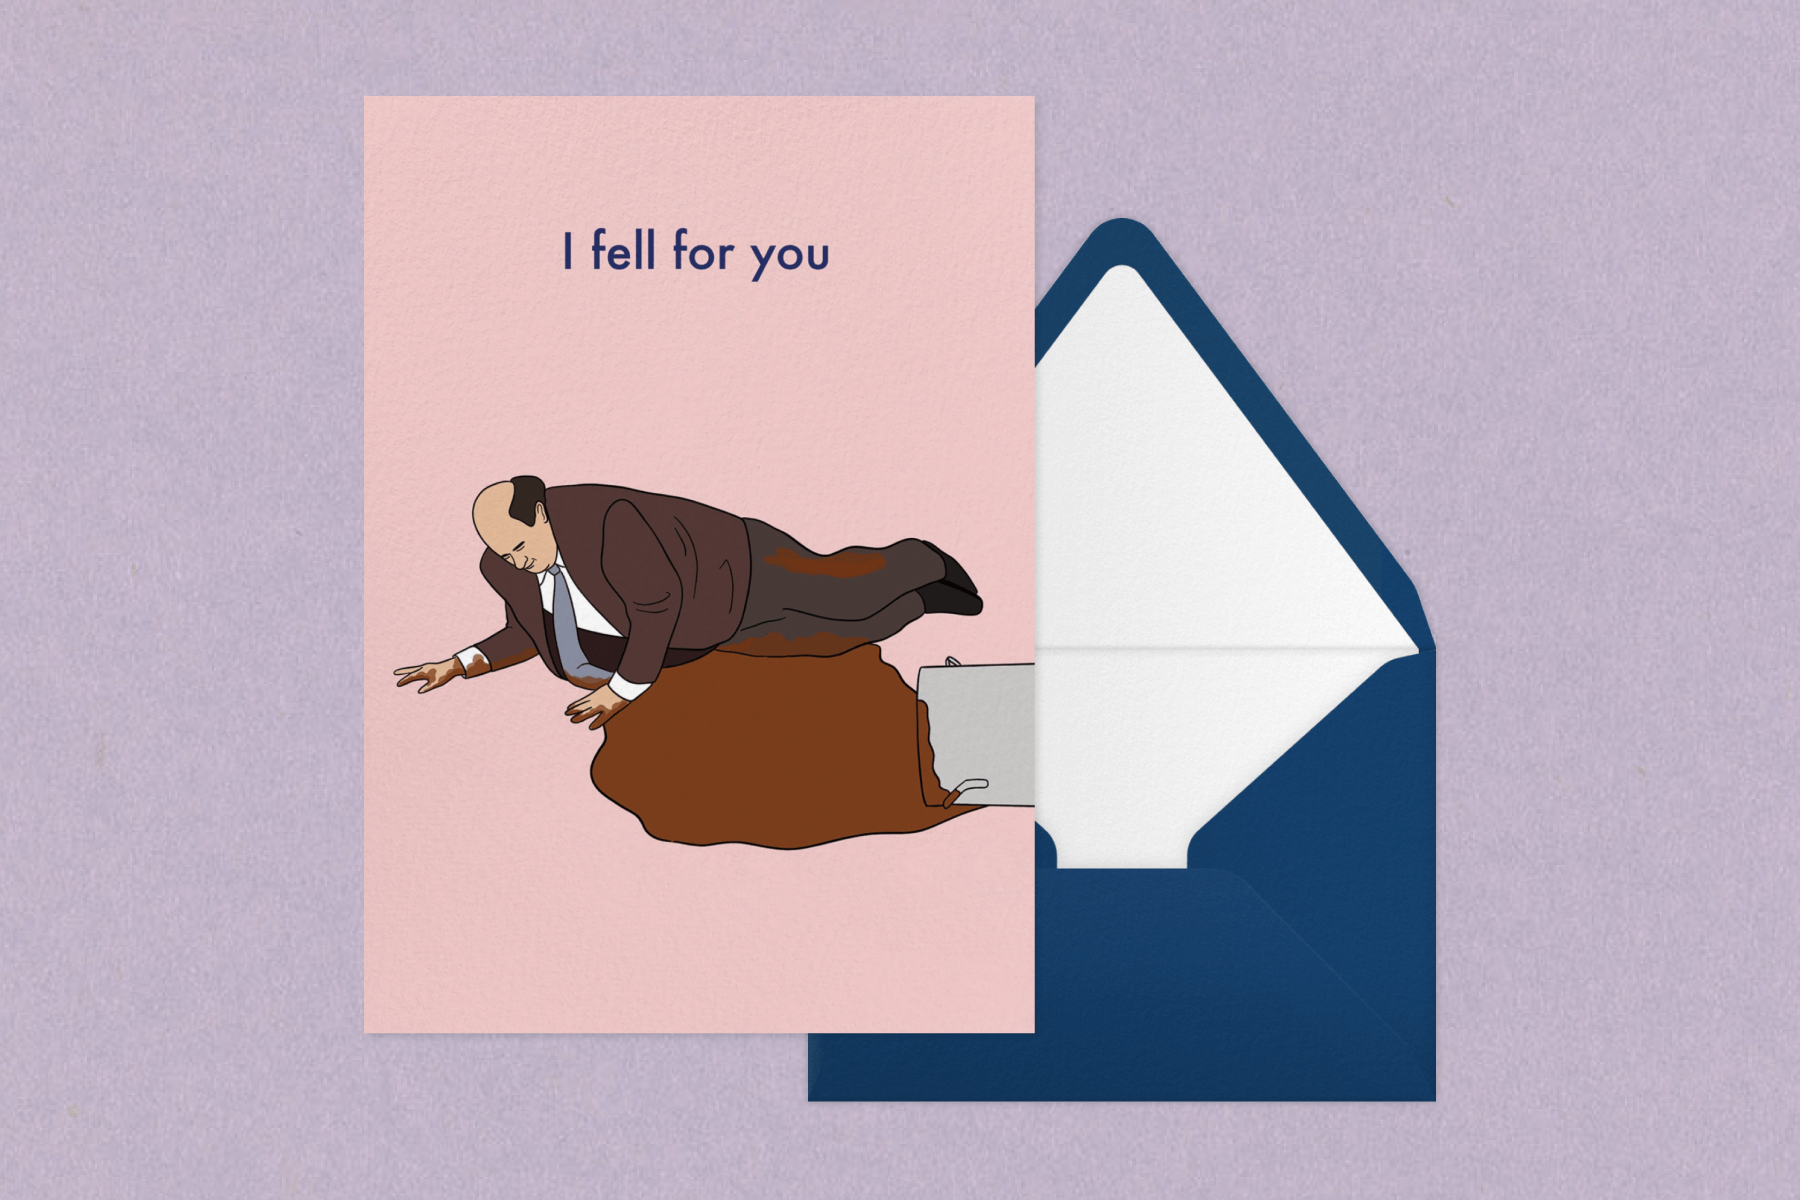 A card shows Kevin from ‘The Office’ slipping on his famous chili and the words ‘I fell for you.’